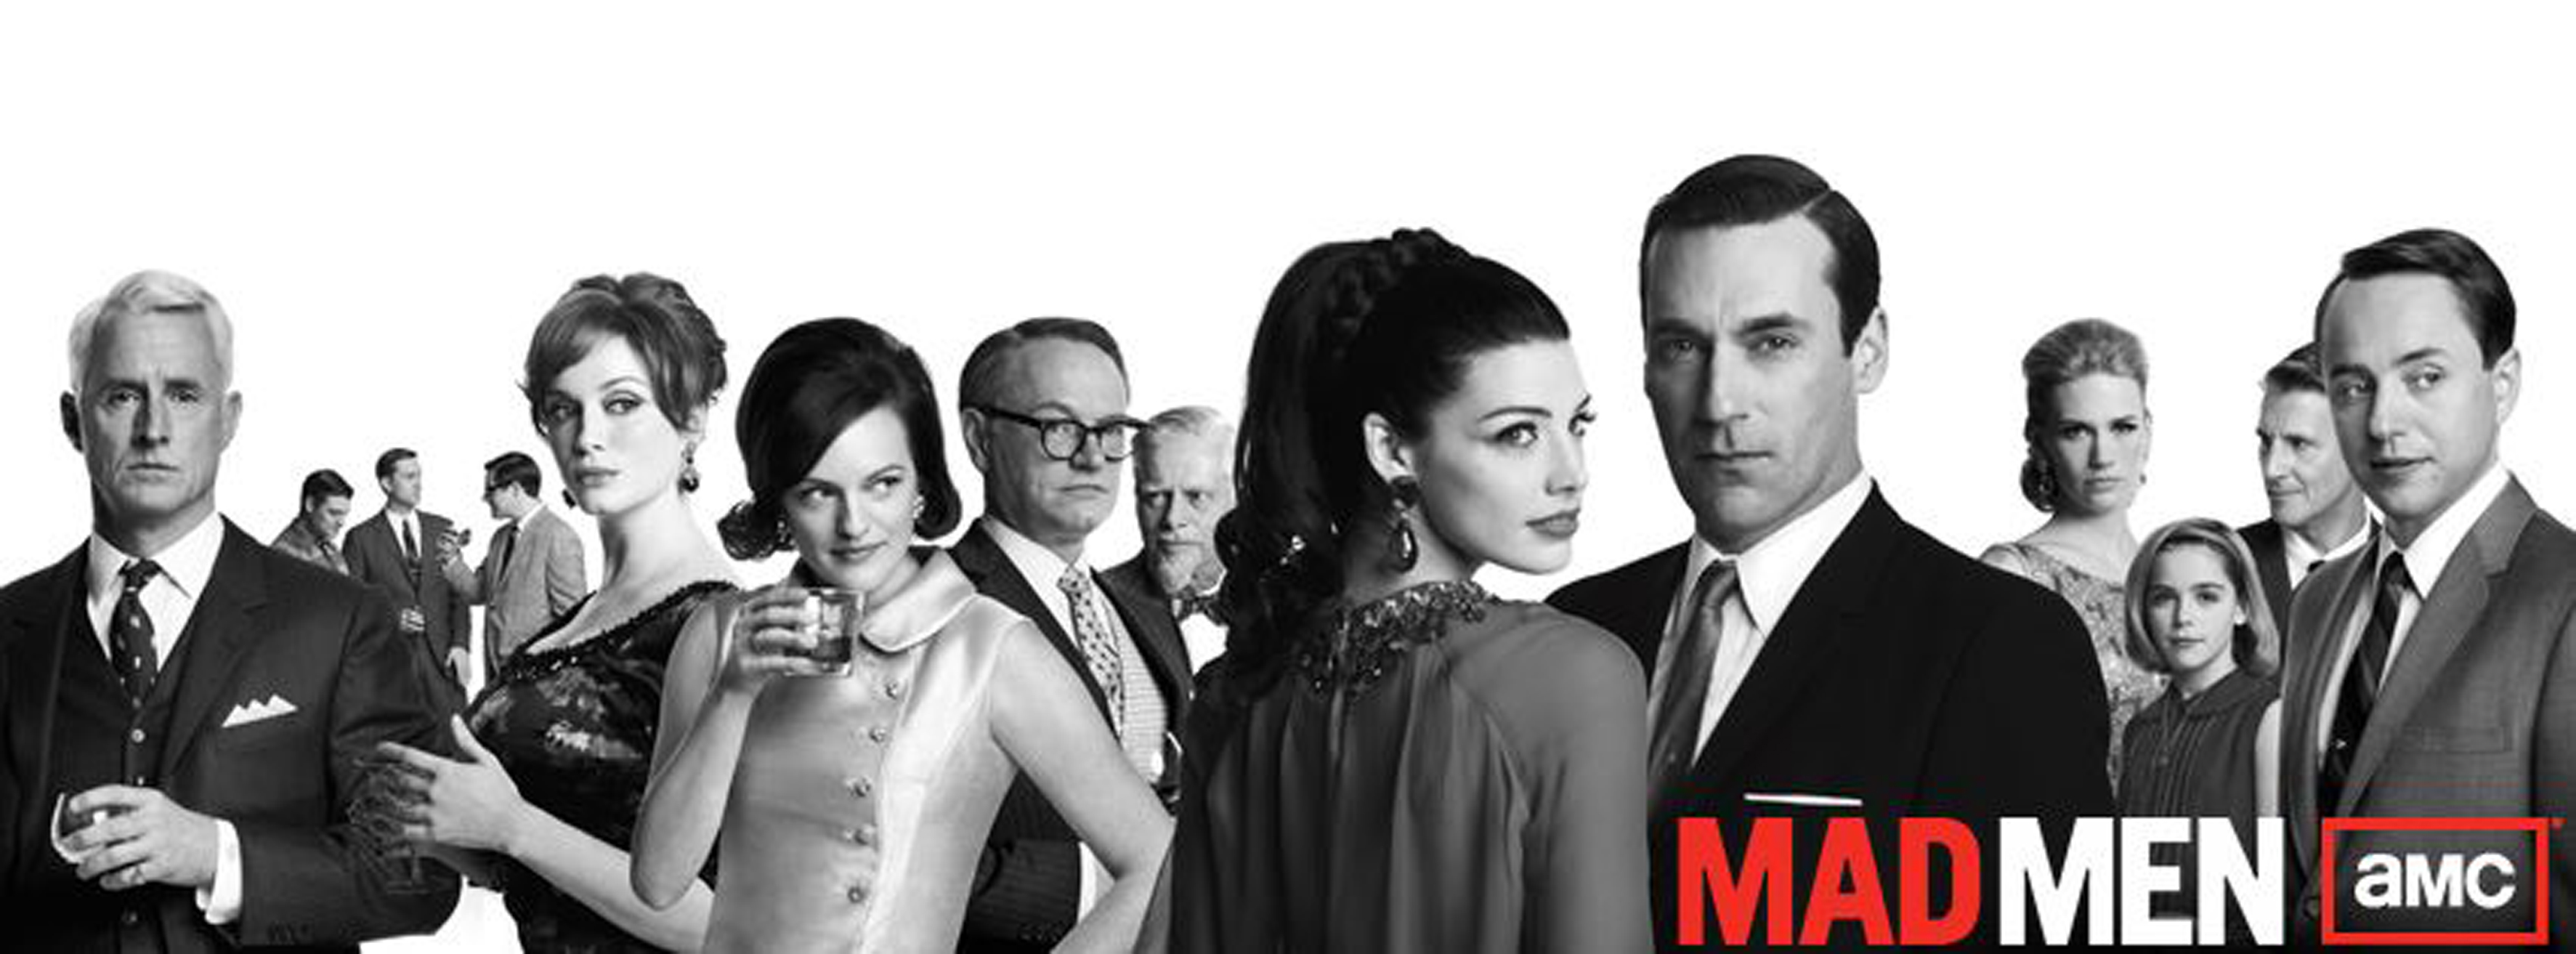 Nice Images Collection: Mad Men Desktop Wallpapers